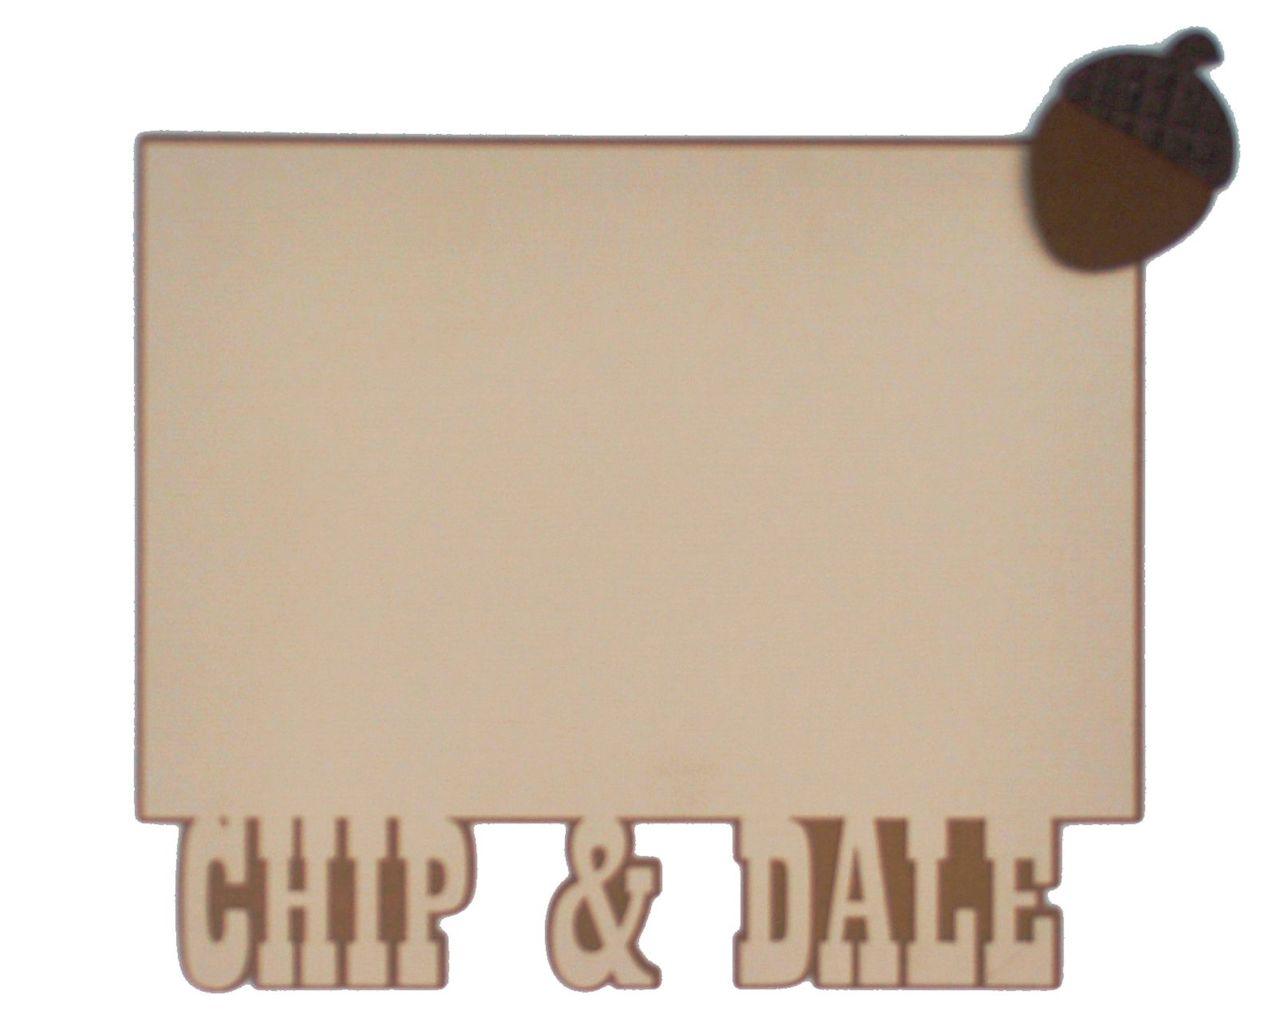 Disneyana Collection Goofy & Chip and Dale Embellished 4 x 6 Photo Mats by SSC Laser Designs